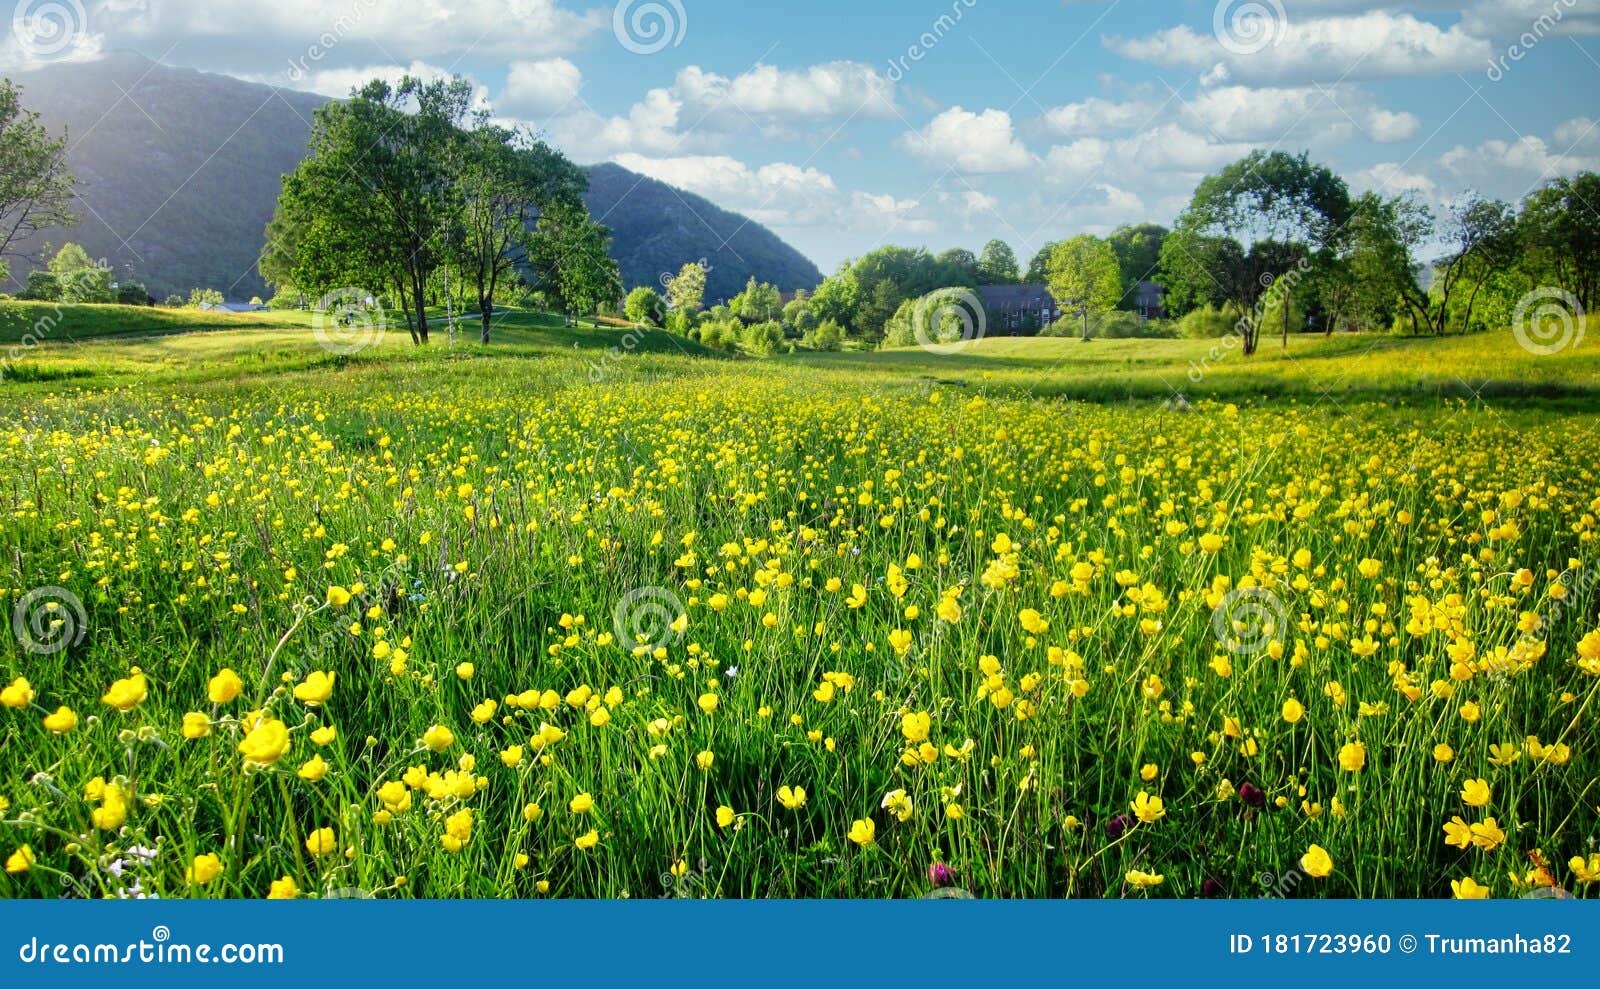 nature spring landscape with a field of wild yellow buttercups, green trees and white clouds in blue sky